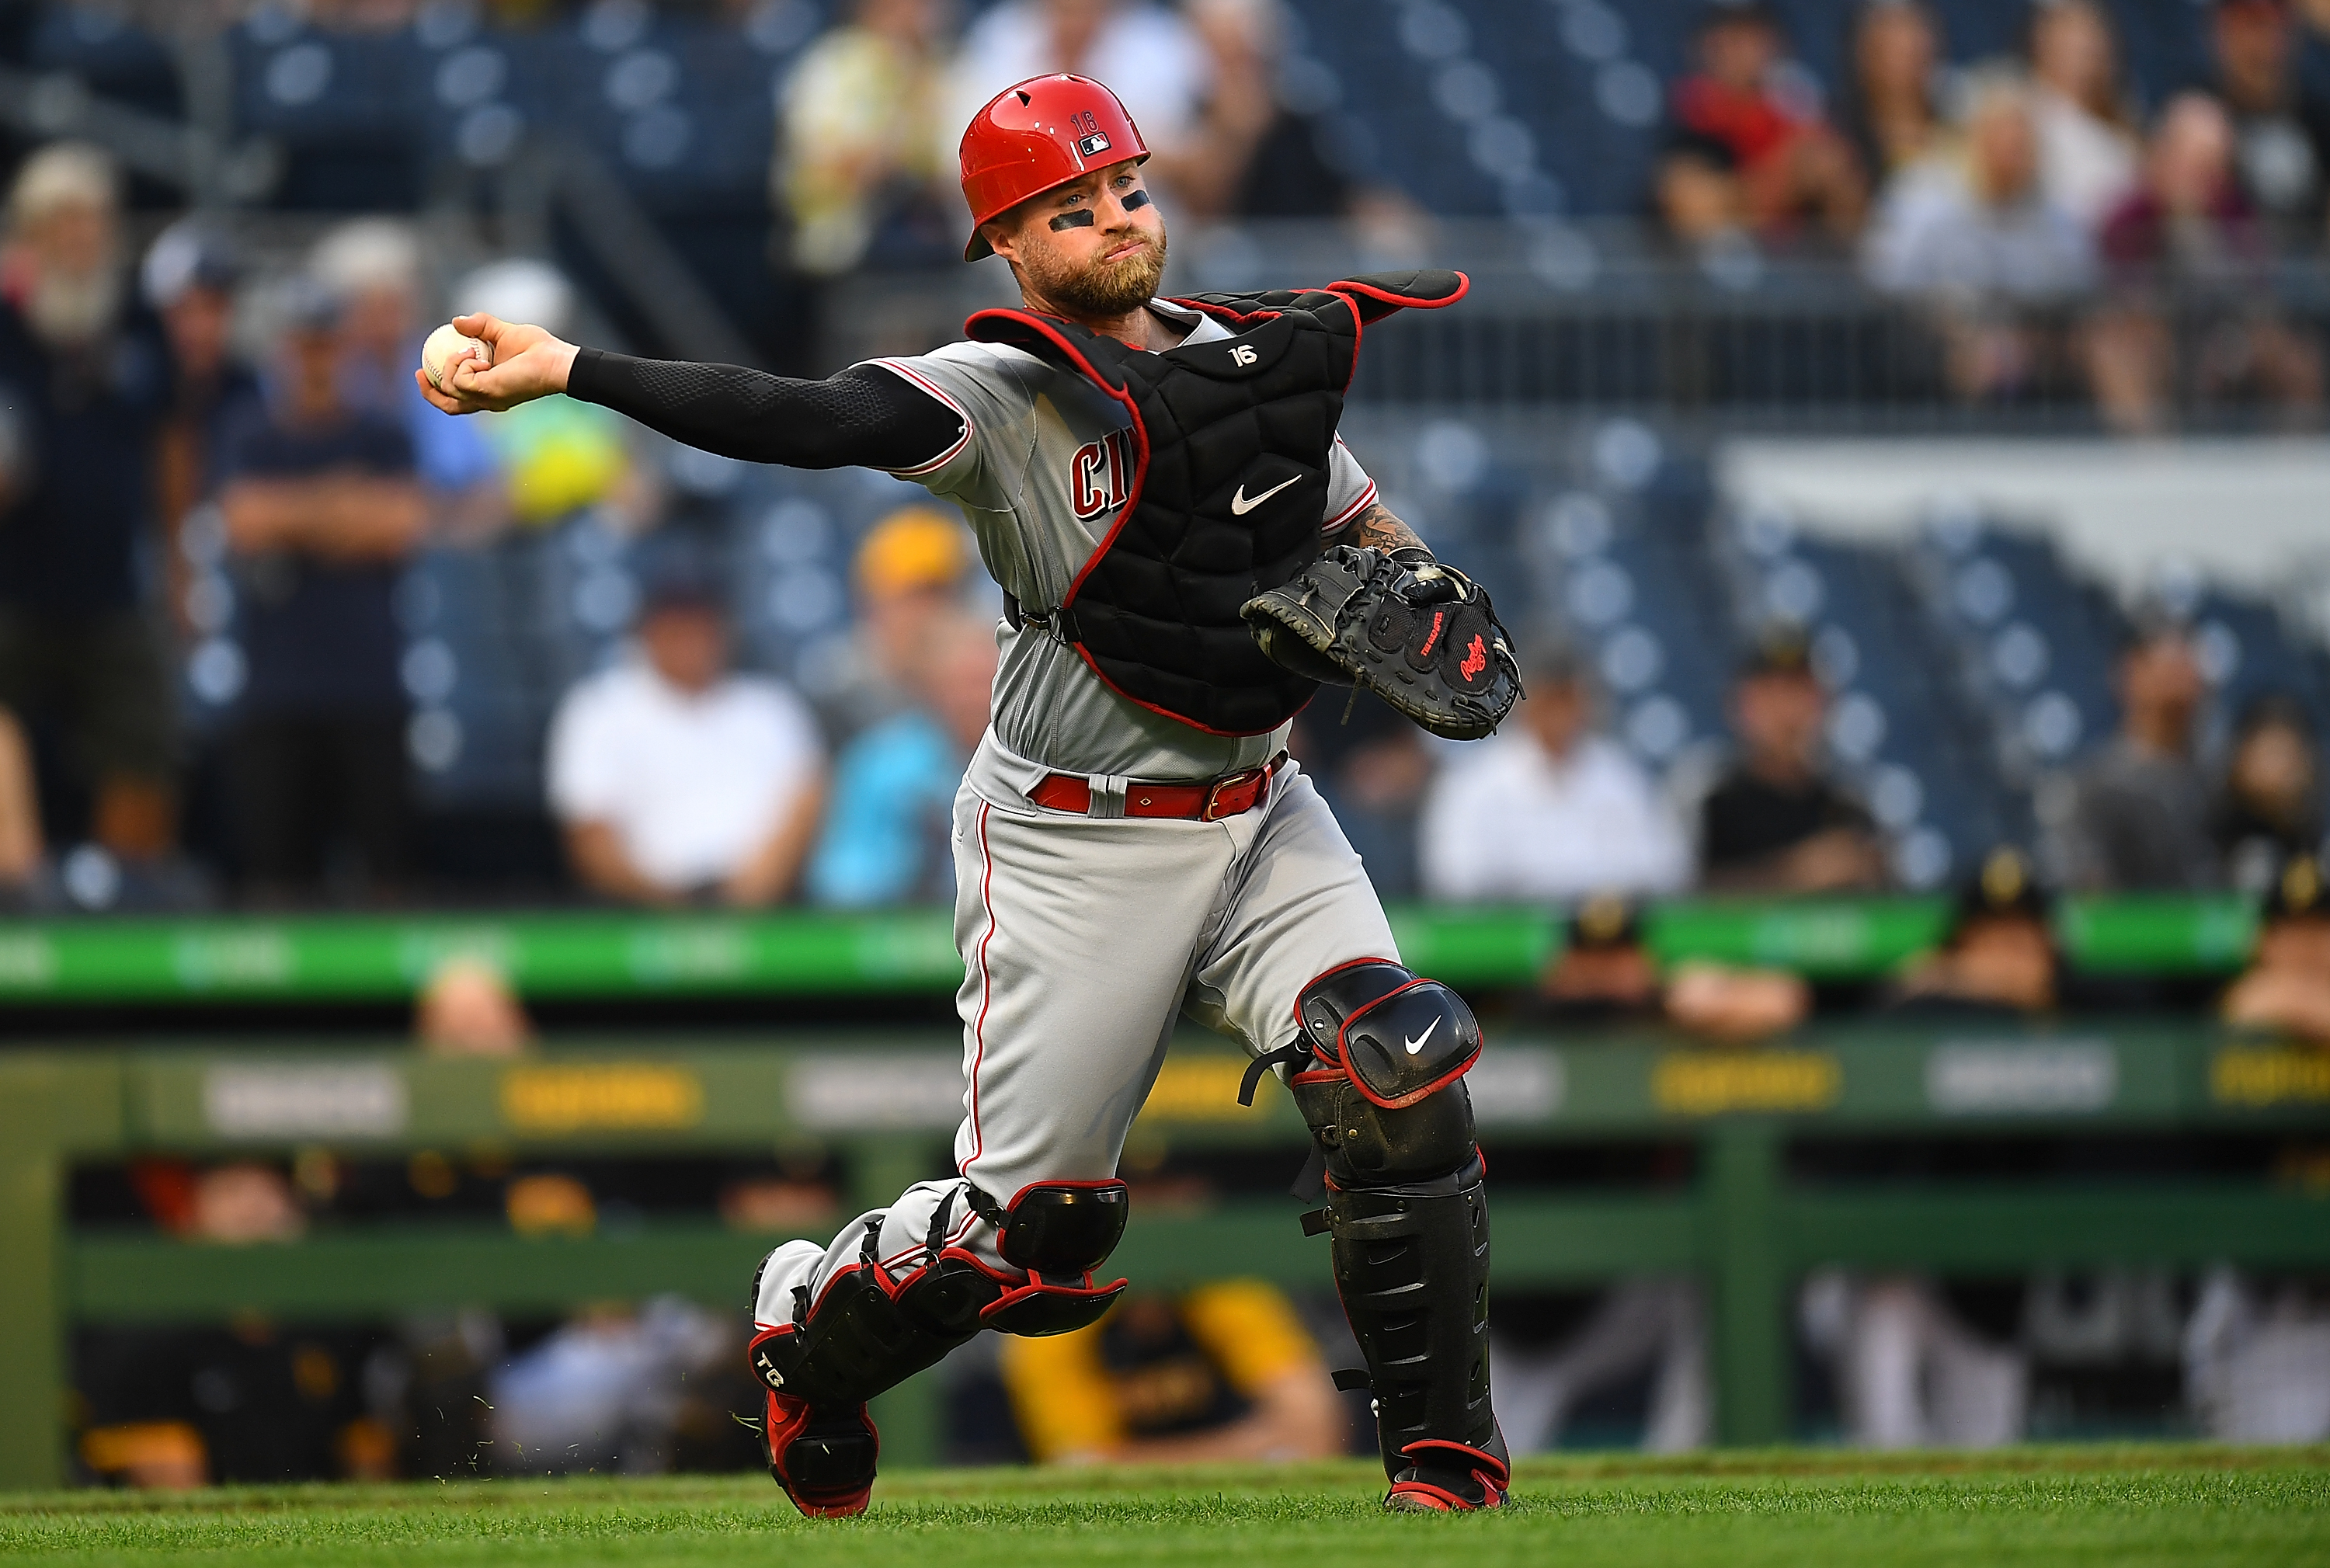 Tigers strike quickly, acquire catcher Tucker Barnhart in deal with Reds